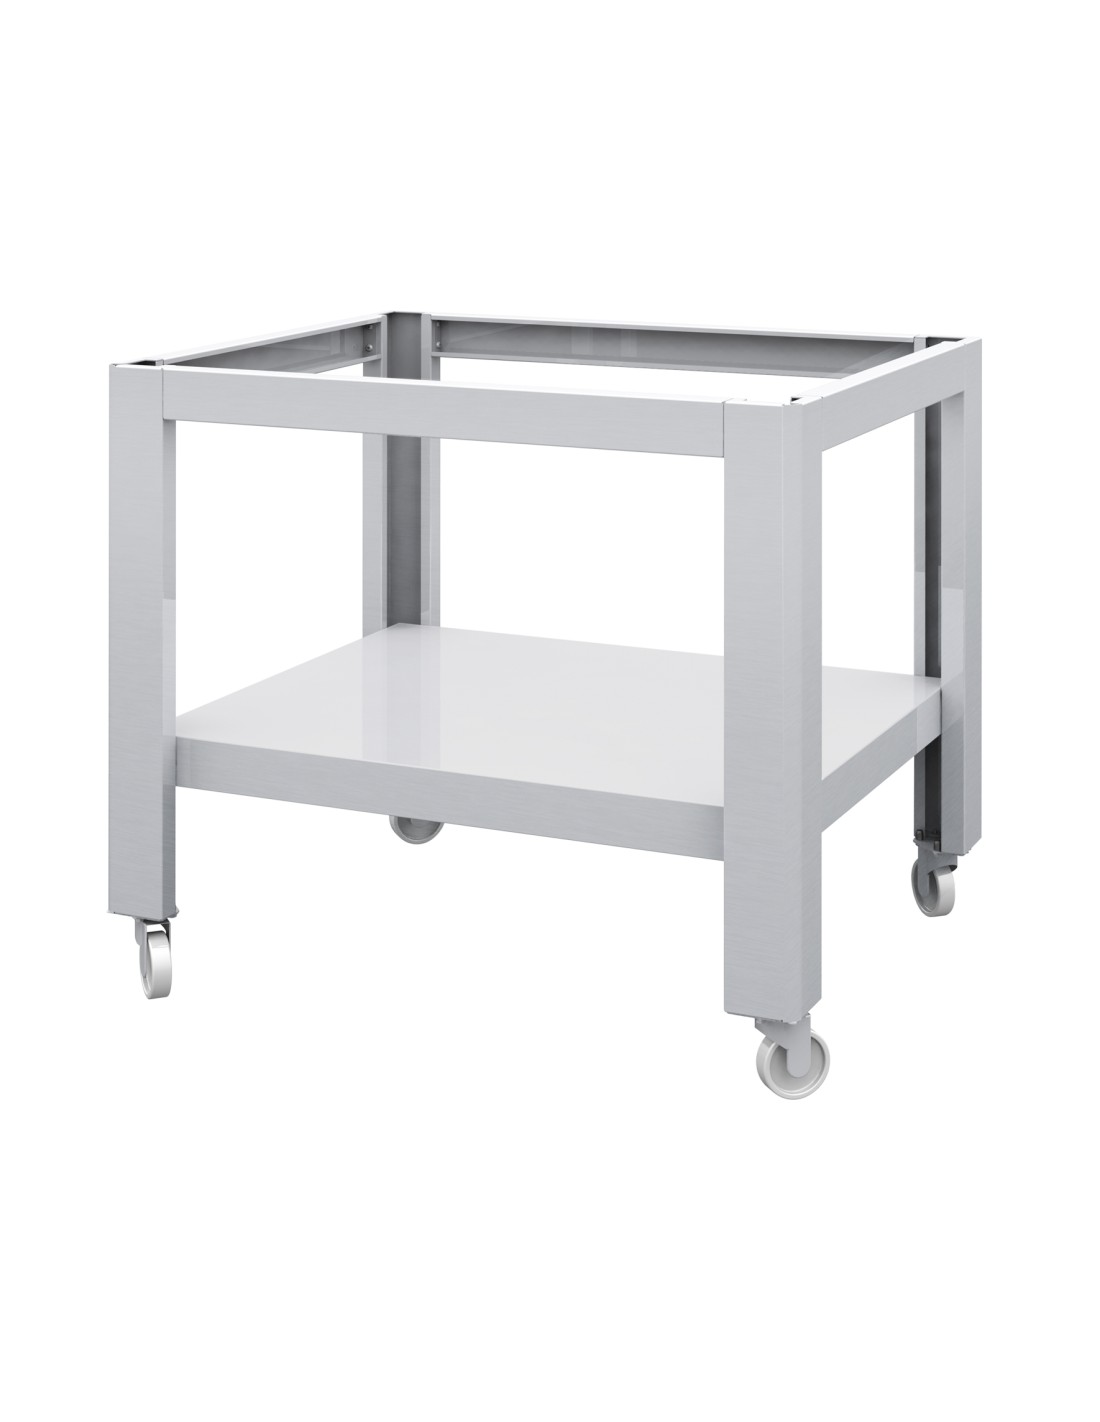 Support in stainless steel - Dimensions cm 110 x 92 x 99 h